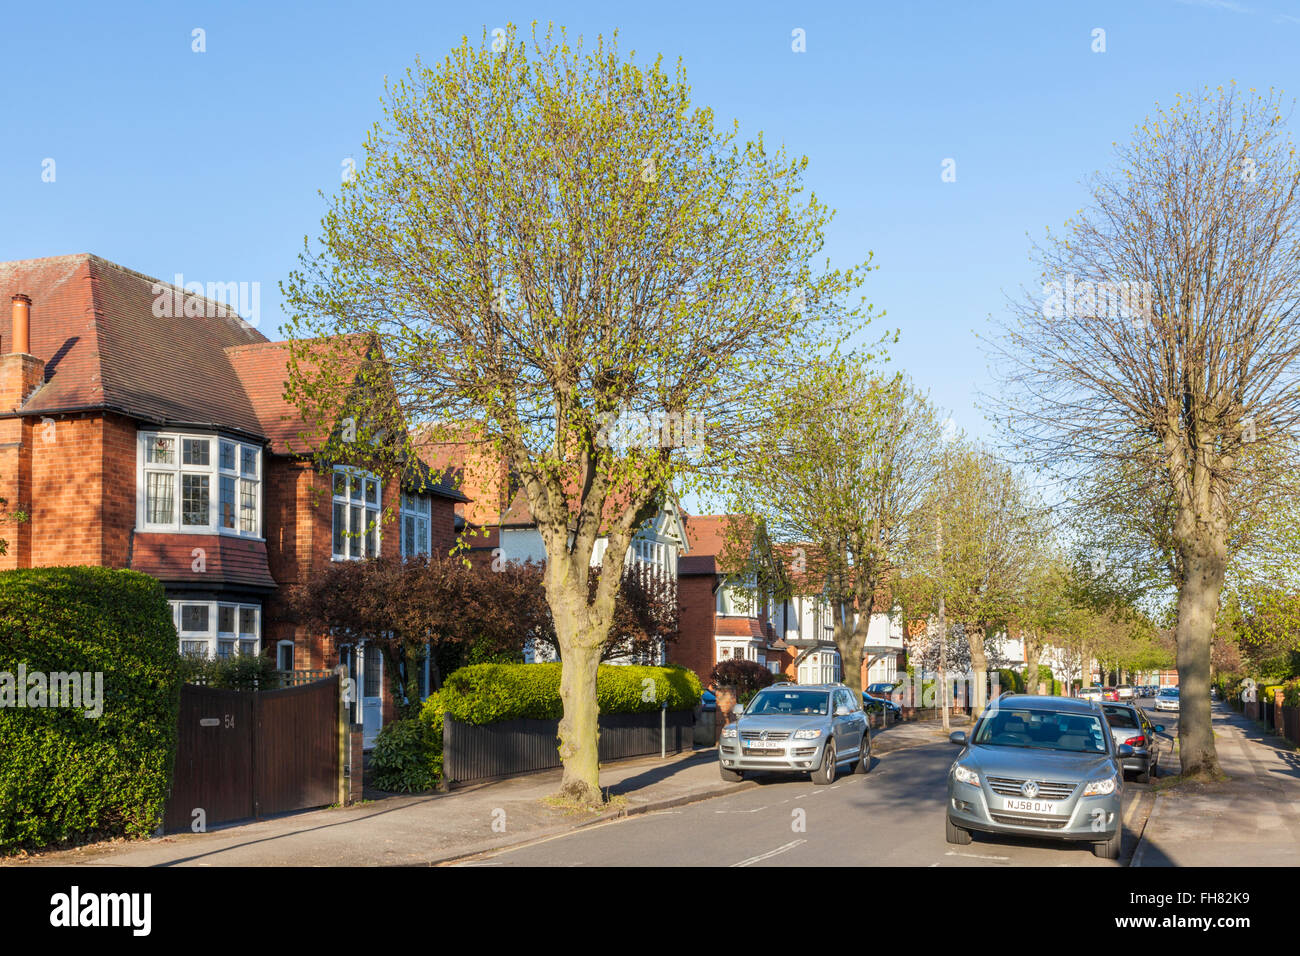 Typical middle class houses on a tree lined residential street in West Bridgford, Nottinghamshire, England, UK Stock Photo